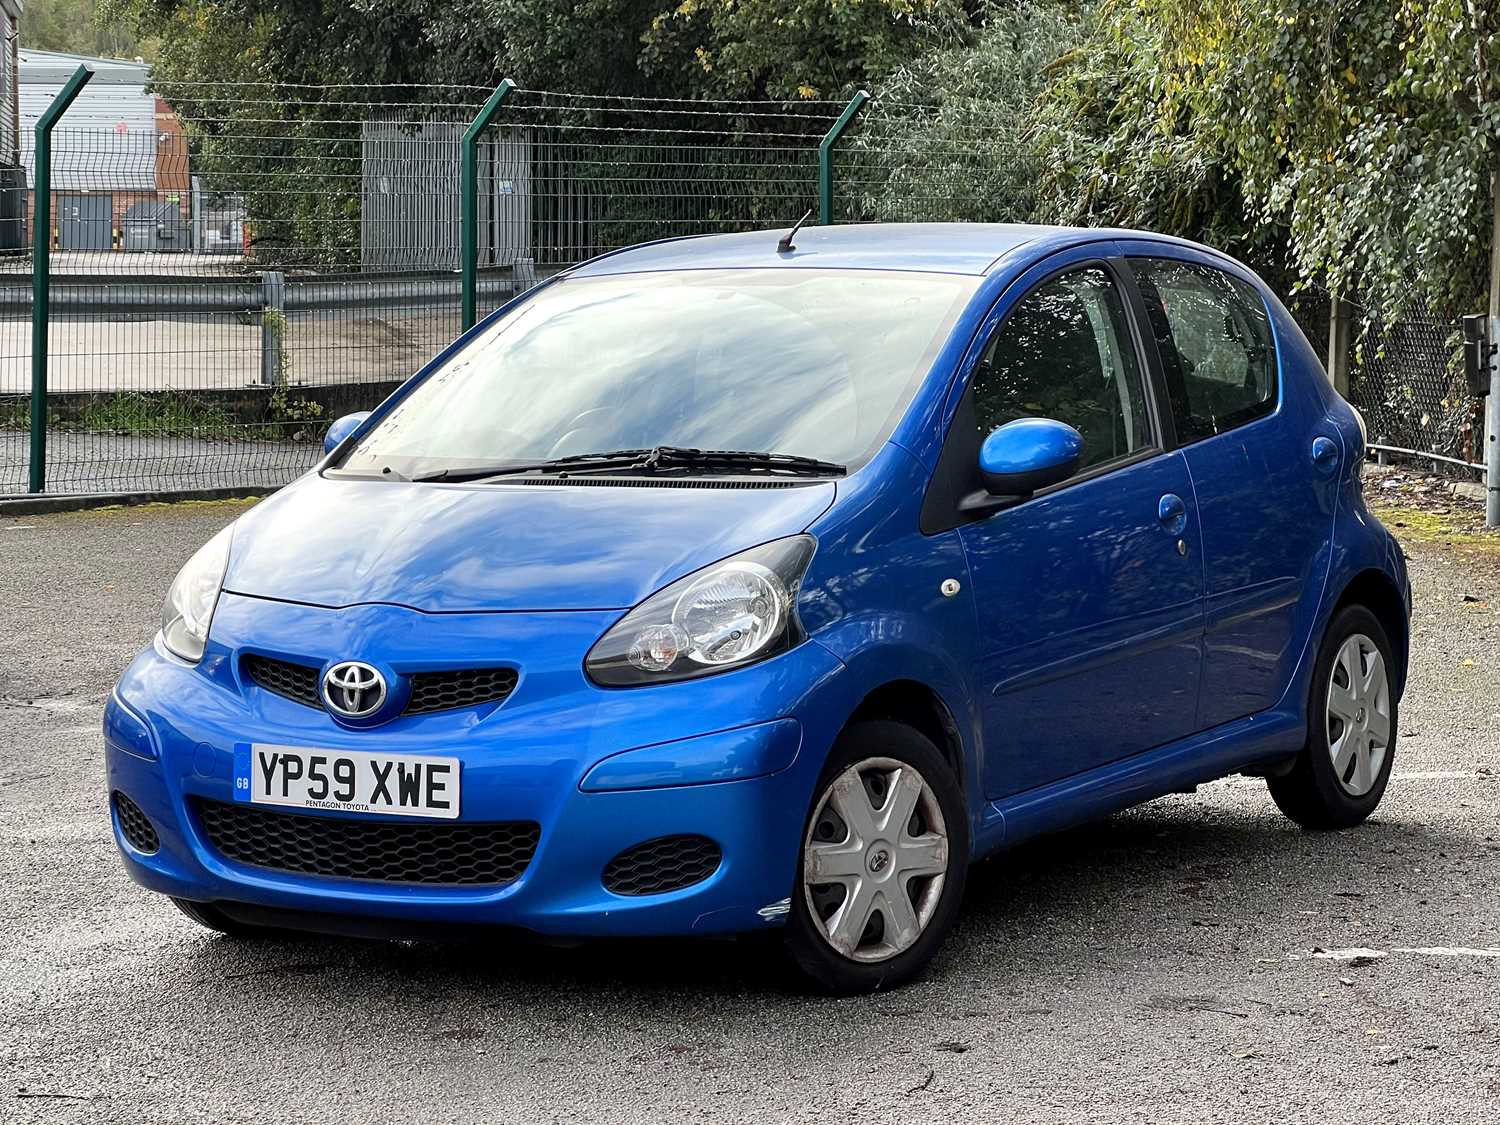 2009 [YP59 XWE] Toyota Aygo 1.0 VVT-i (petrol) 5-door hatchback in blue with 26,970 miles. MOT - Image 3 of 12